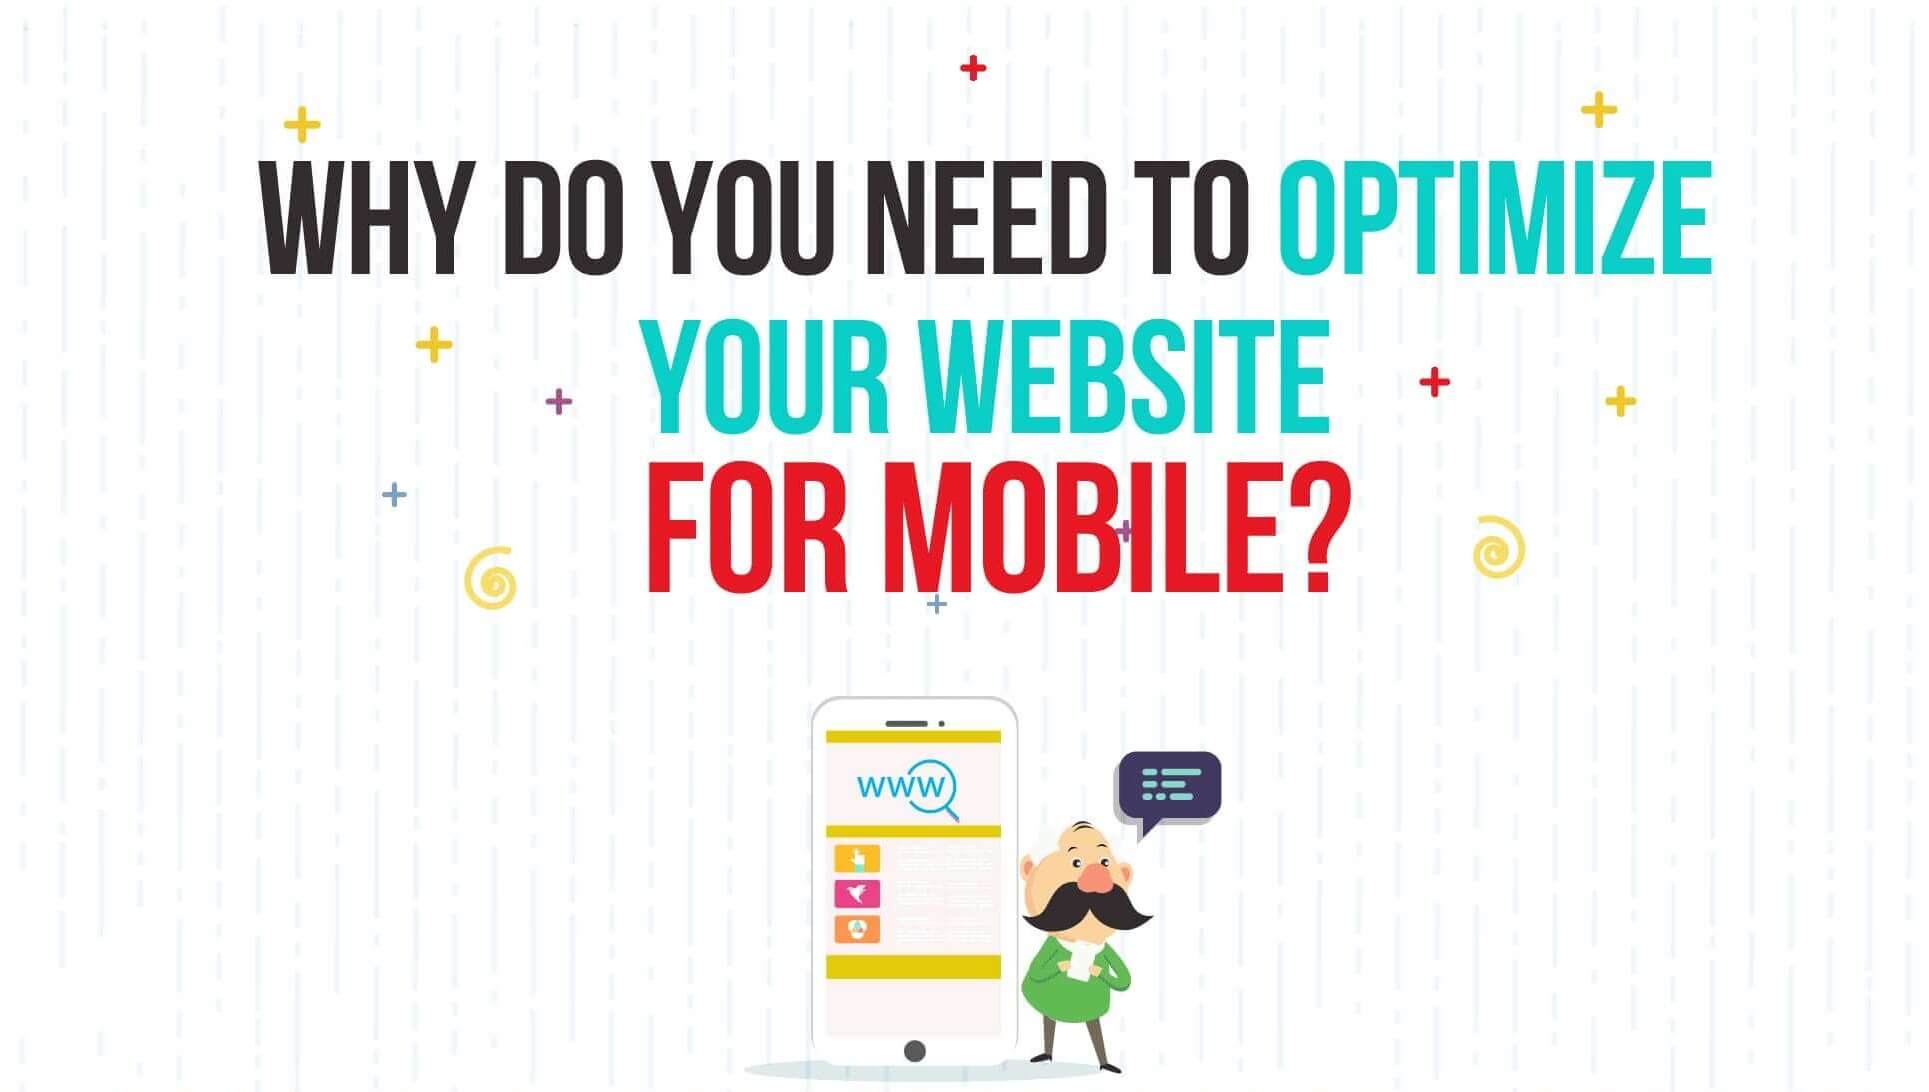 Why do you need to optimize your website for mobile?